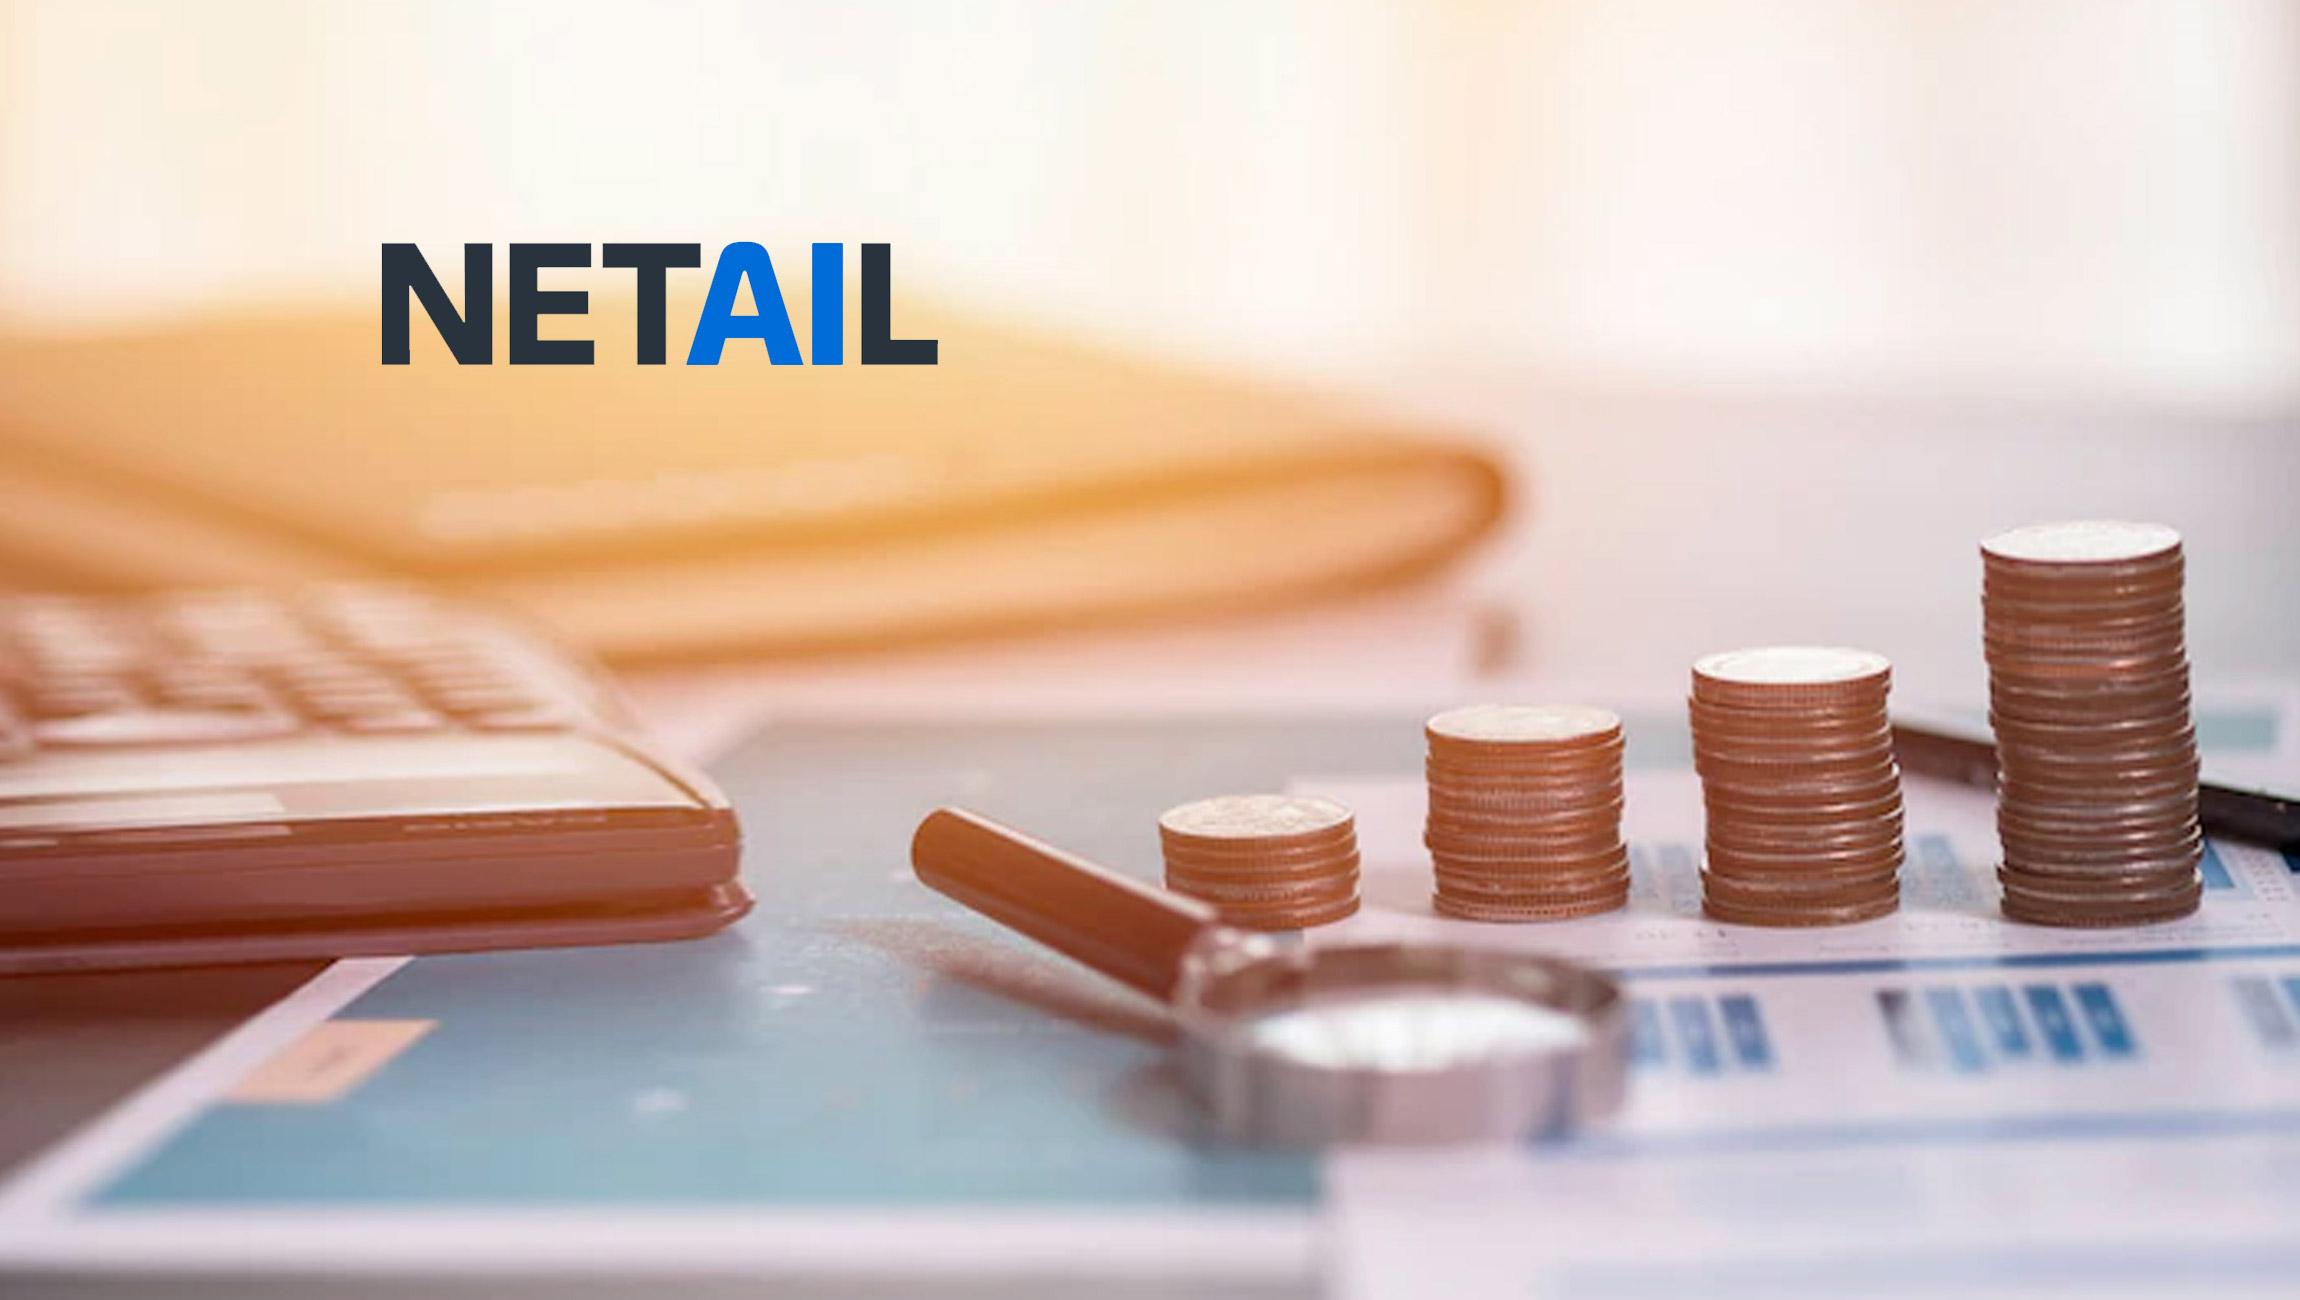 Netail Closes Seed Funding to Advance Retail-Focused AI Development